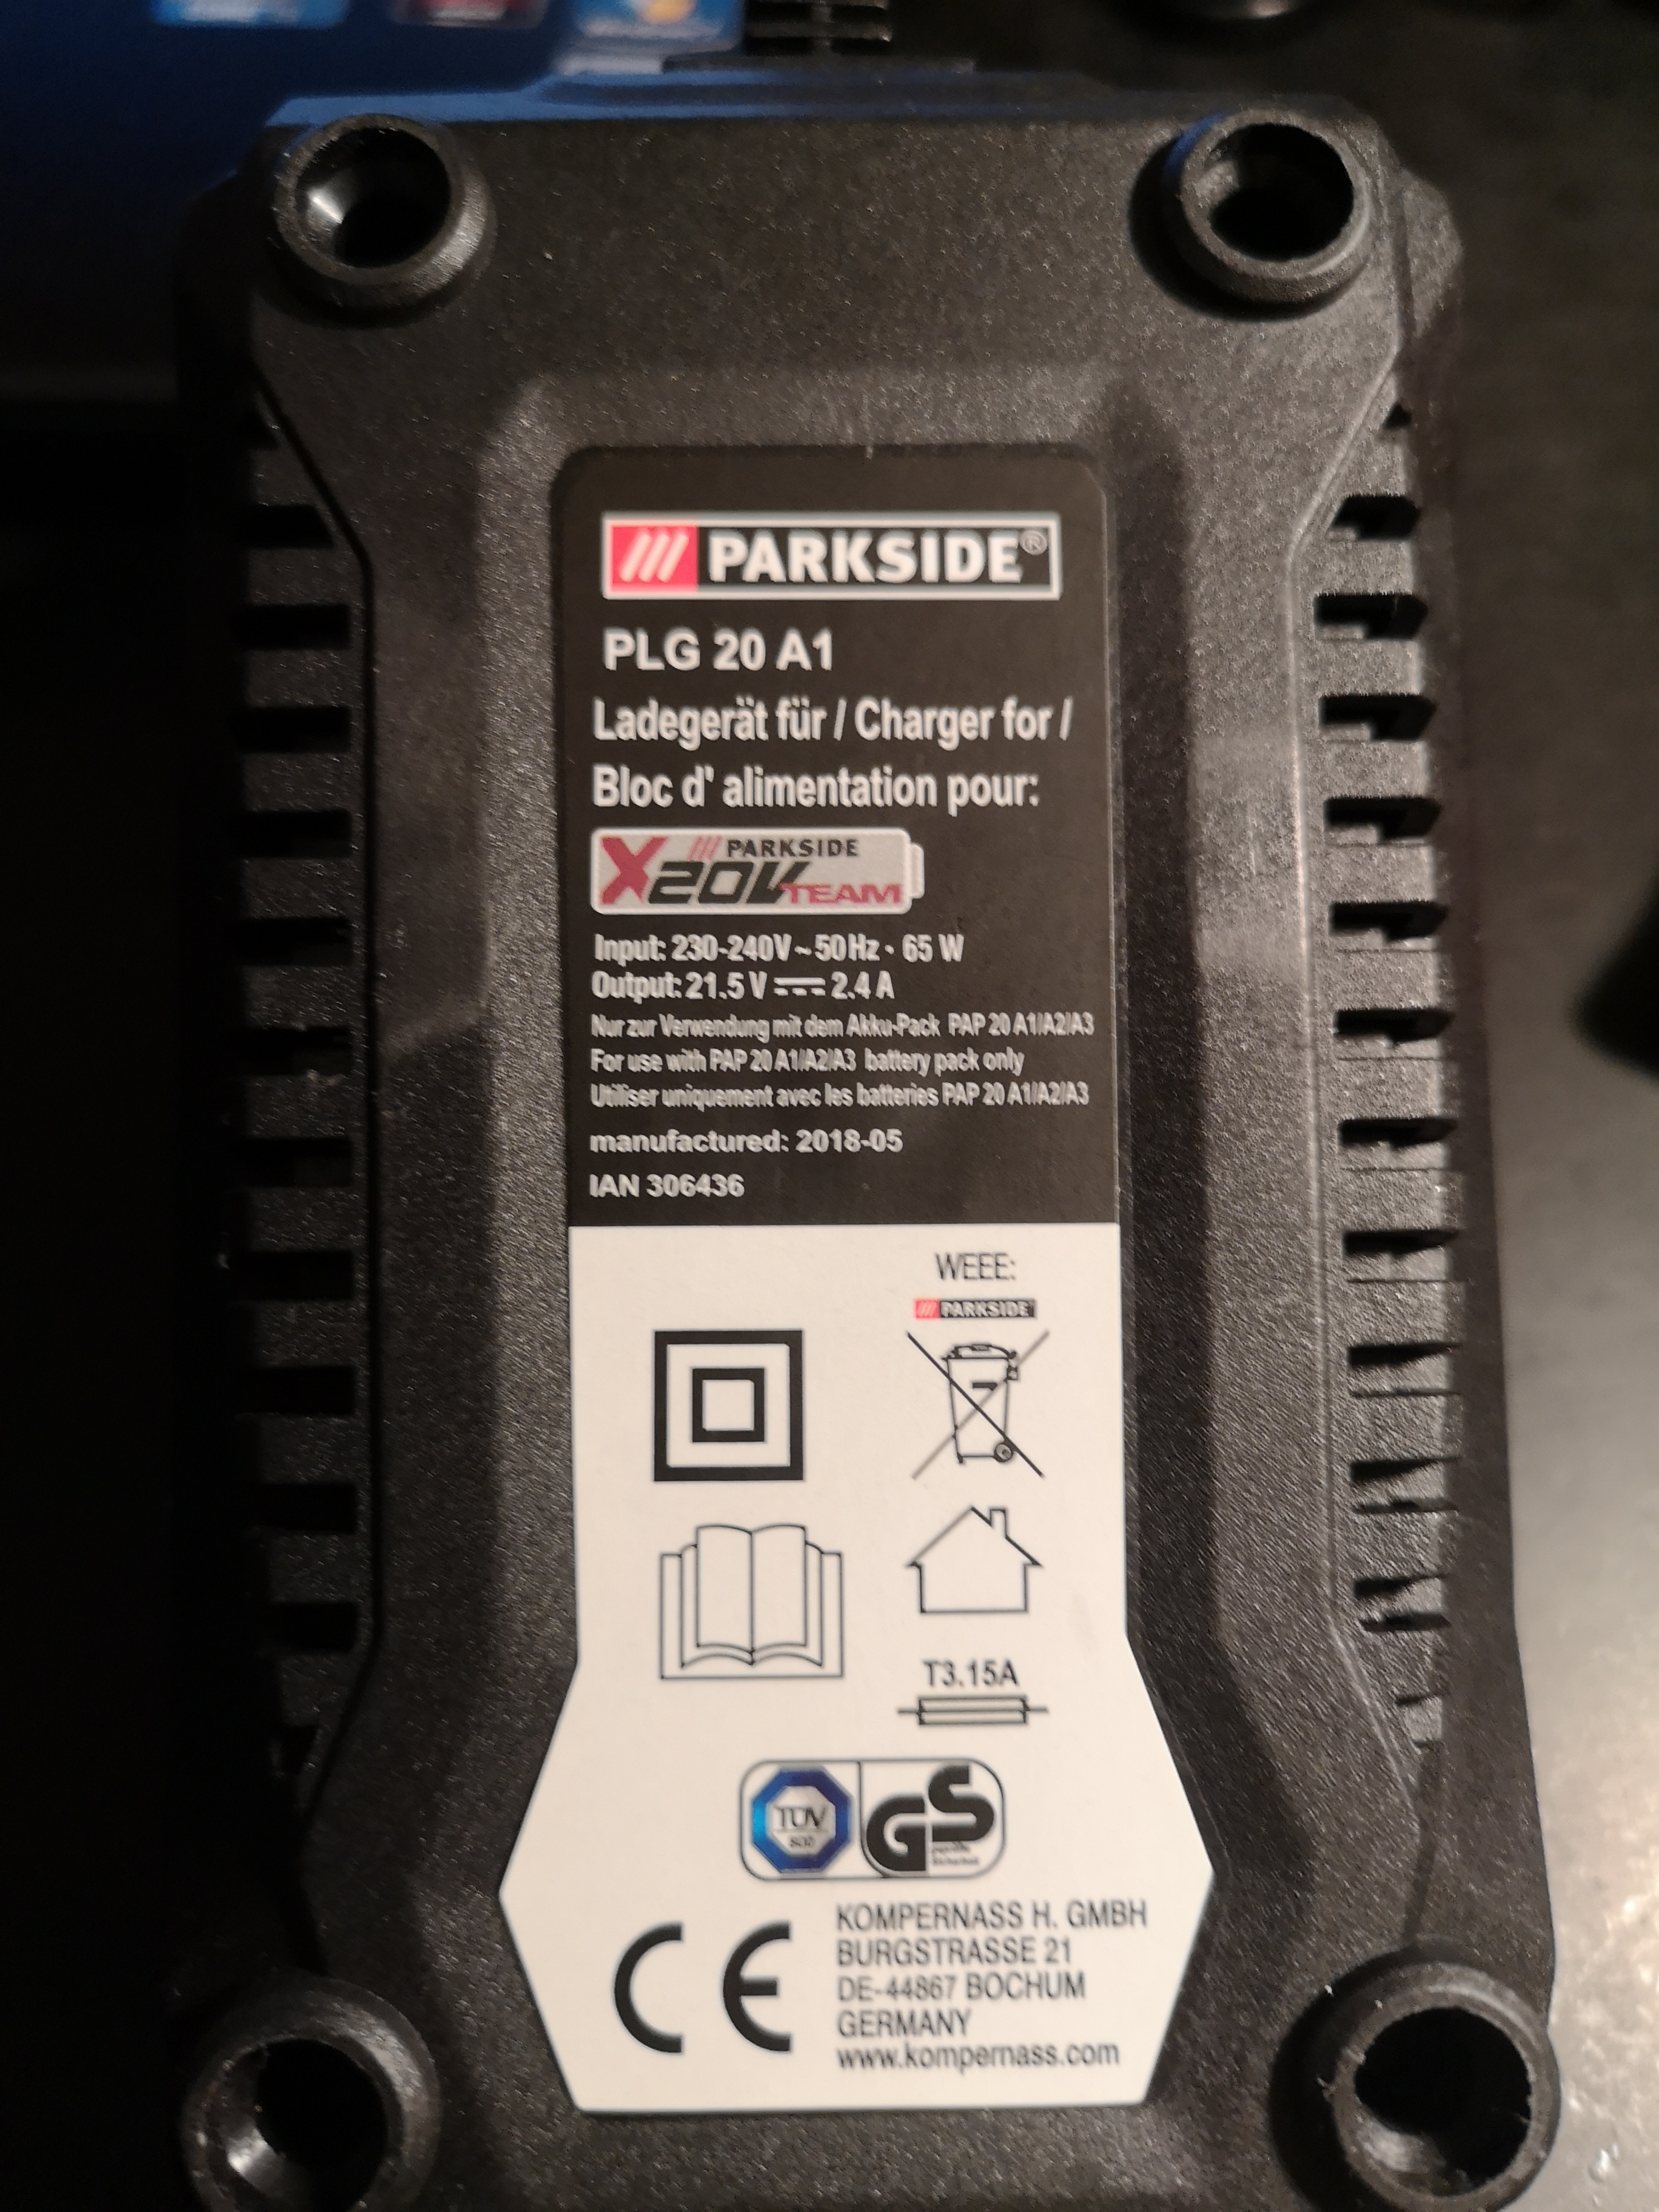 Modifying Parkside PLG 20 A1 Charger Continuous Operation for with Converted Batteries